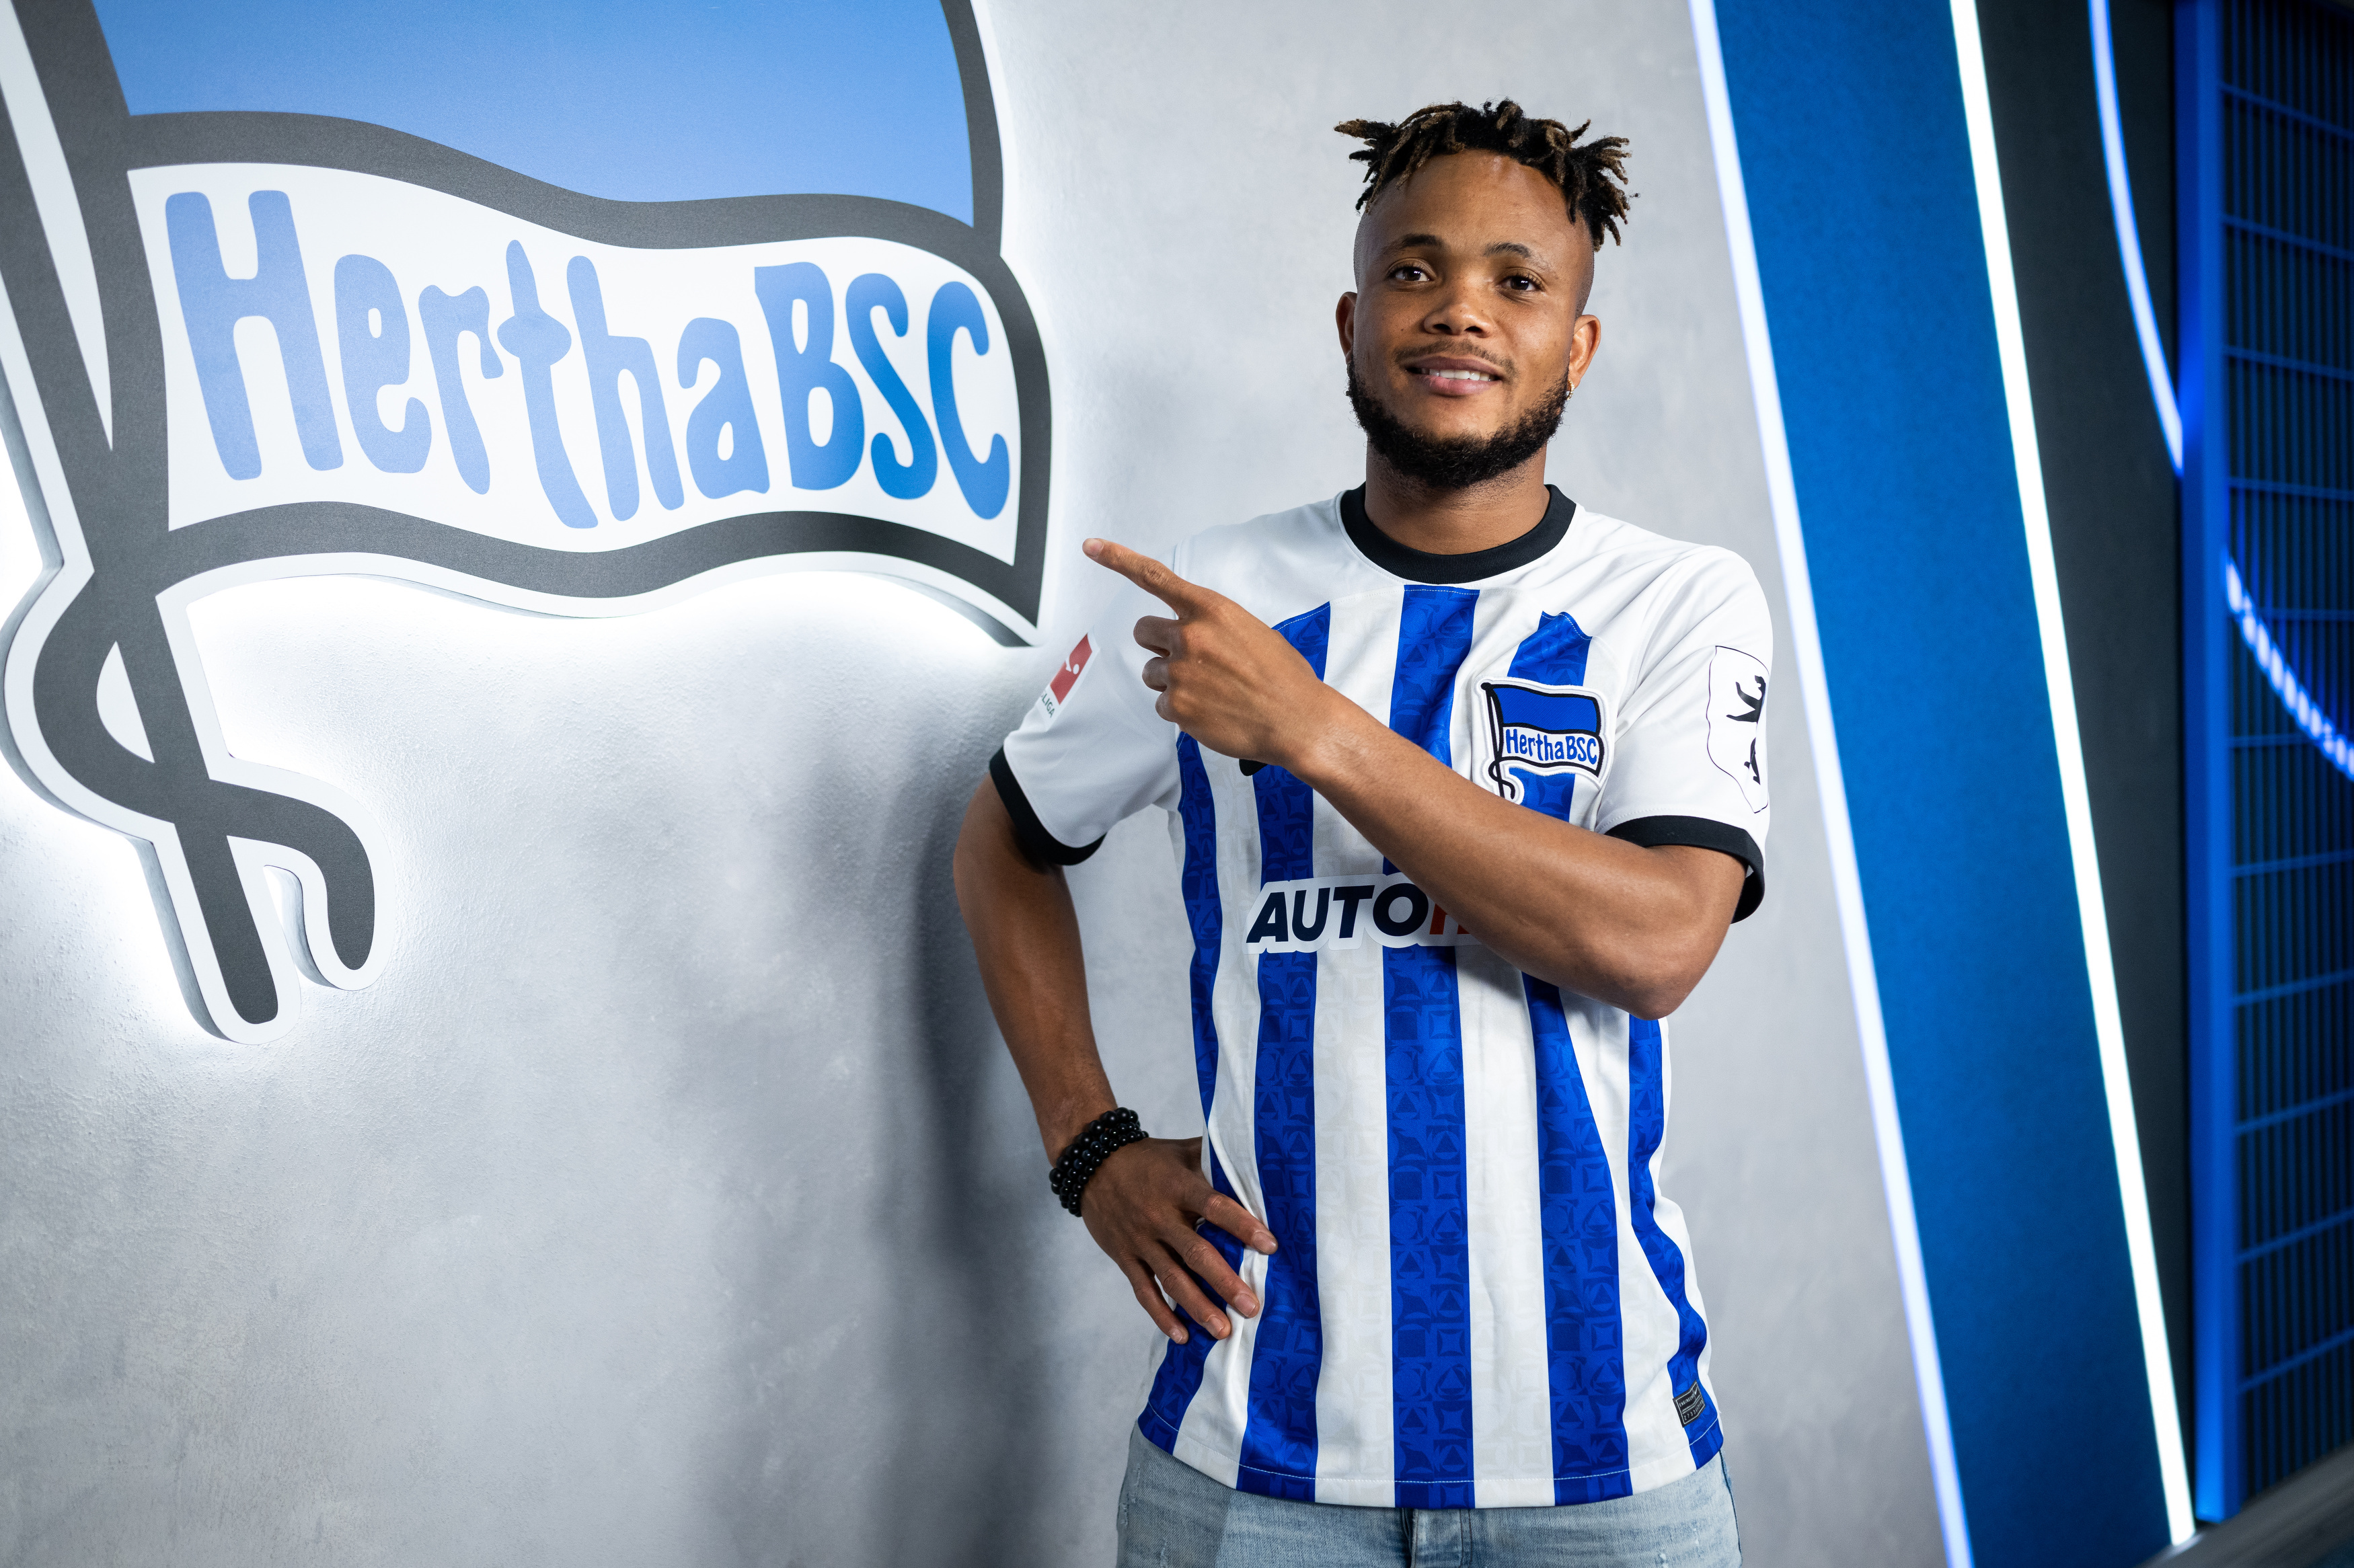 Chidera Ejuke flashes a smile in front of the Hertha badge.